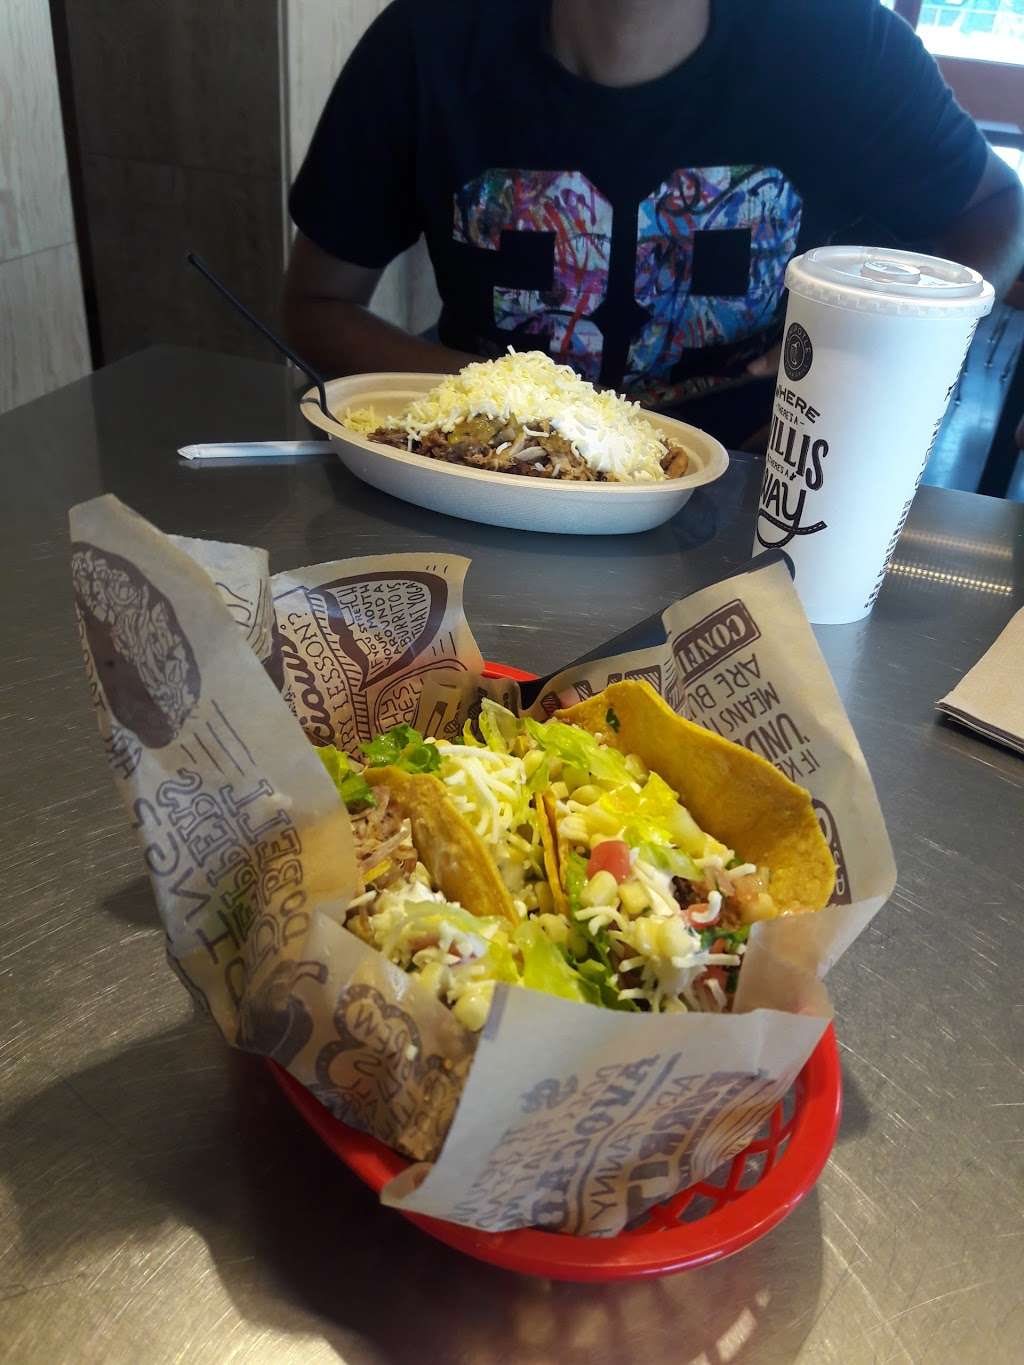 Chipotle Mexican Grill | 750 N Krocks Rd, Allentown, PA 18106 | Phone: (610) 336-8484